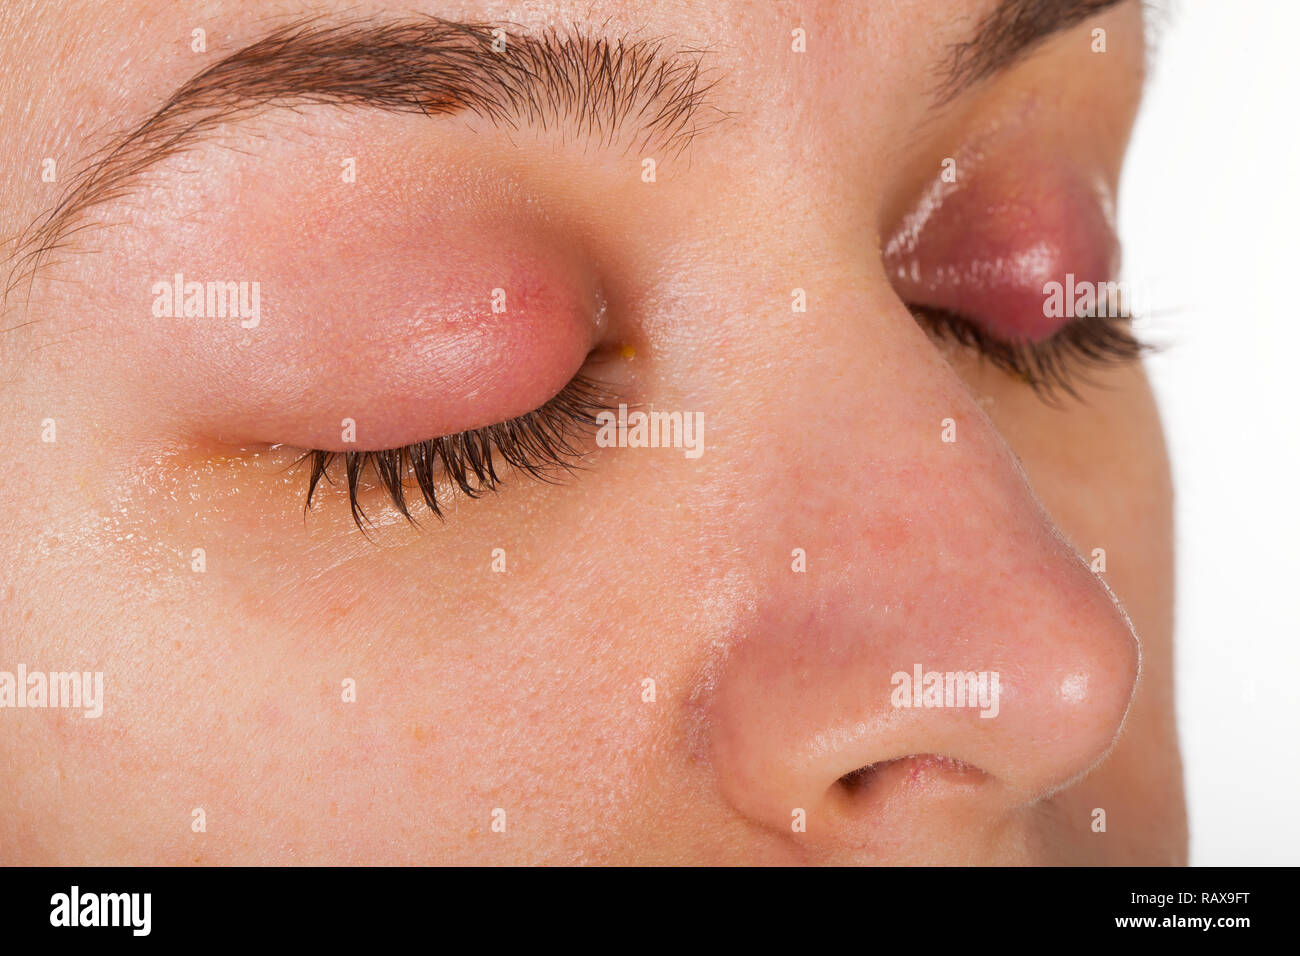 Close up picture of upper eyelid inflammation - chalazion - young female suffering from viral infection Stock Photo